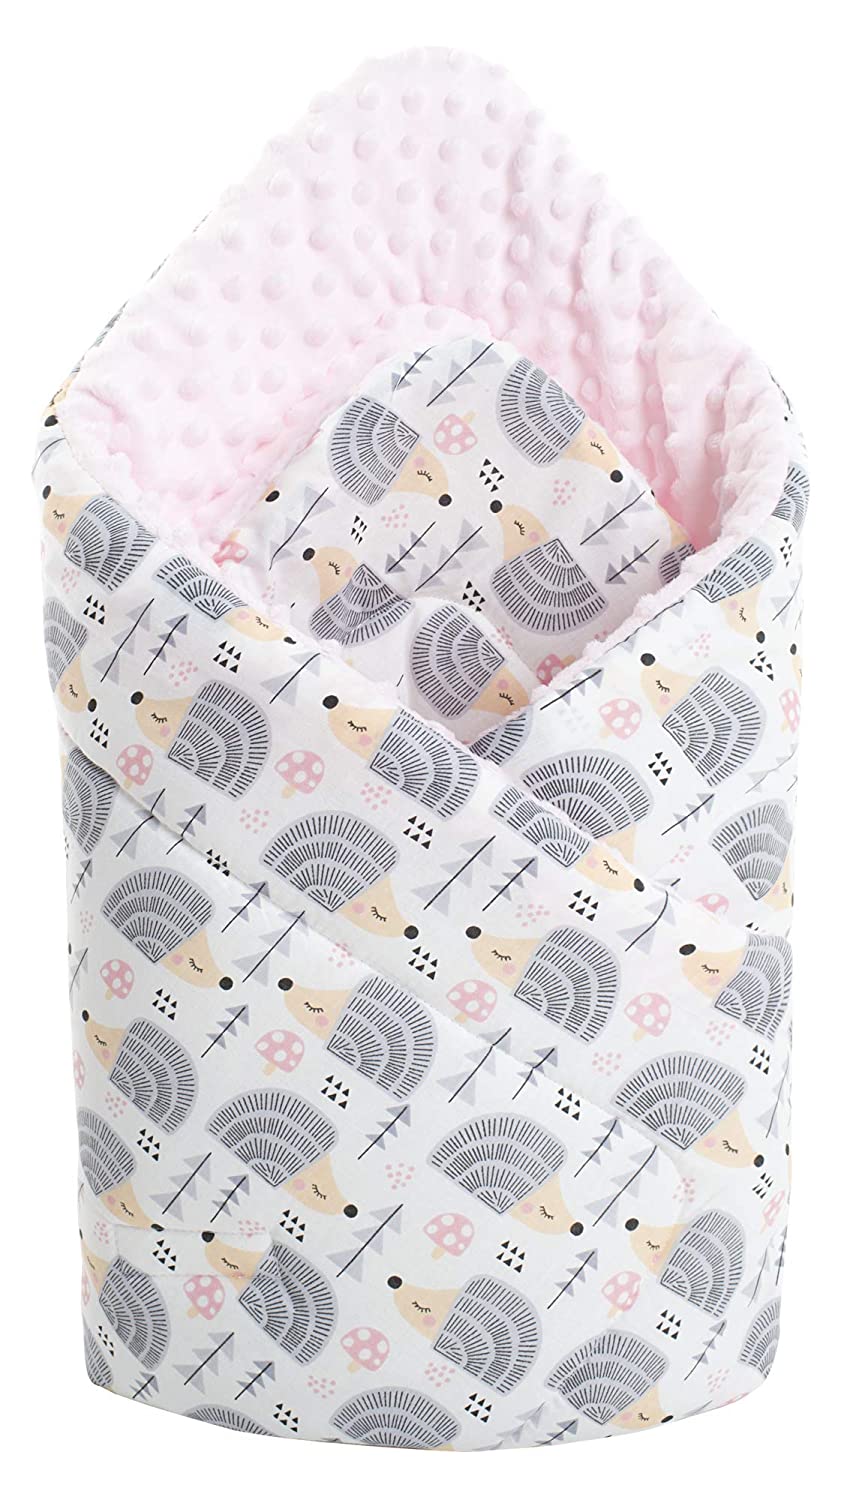 Minky Swaddling Blanket 100% Cotton 75 X 75 Cm Baby Pillow Double-Sided Sof